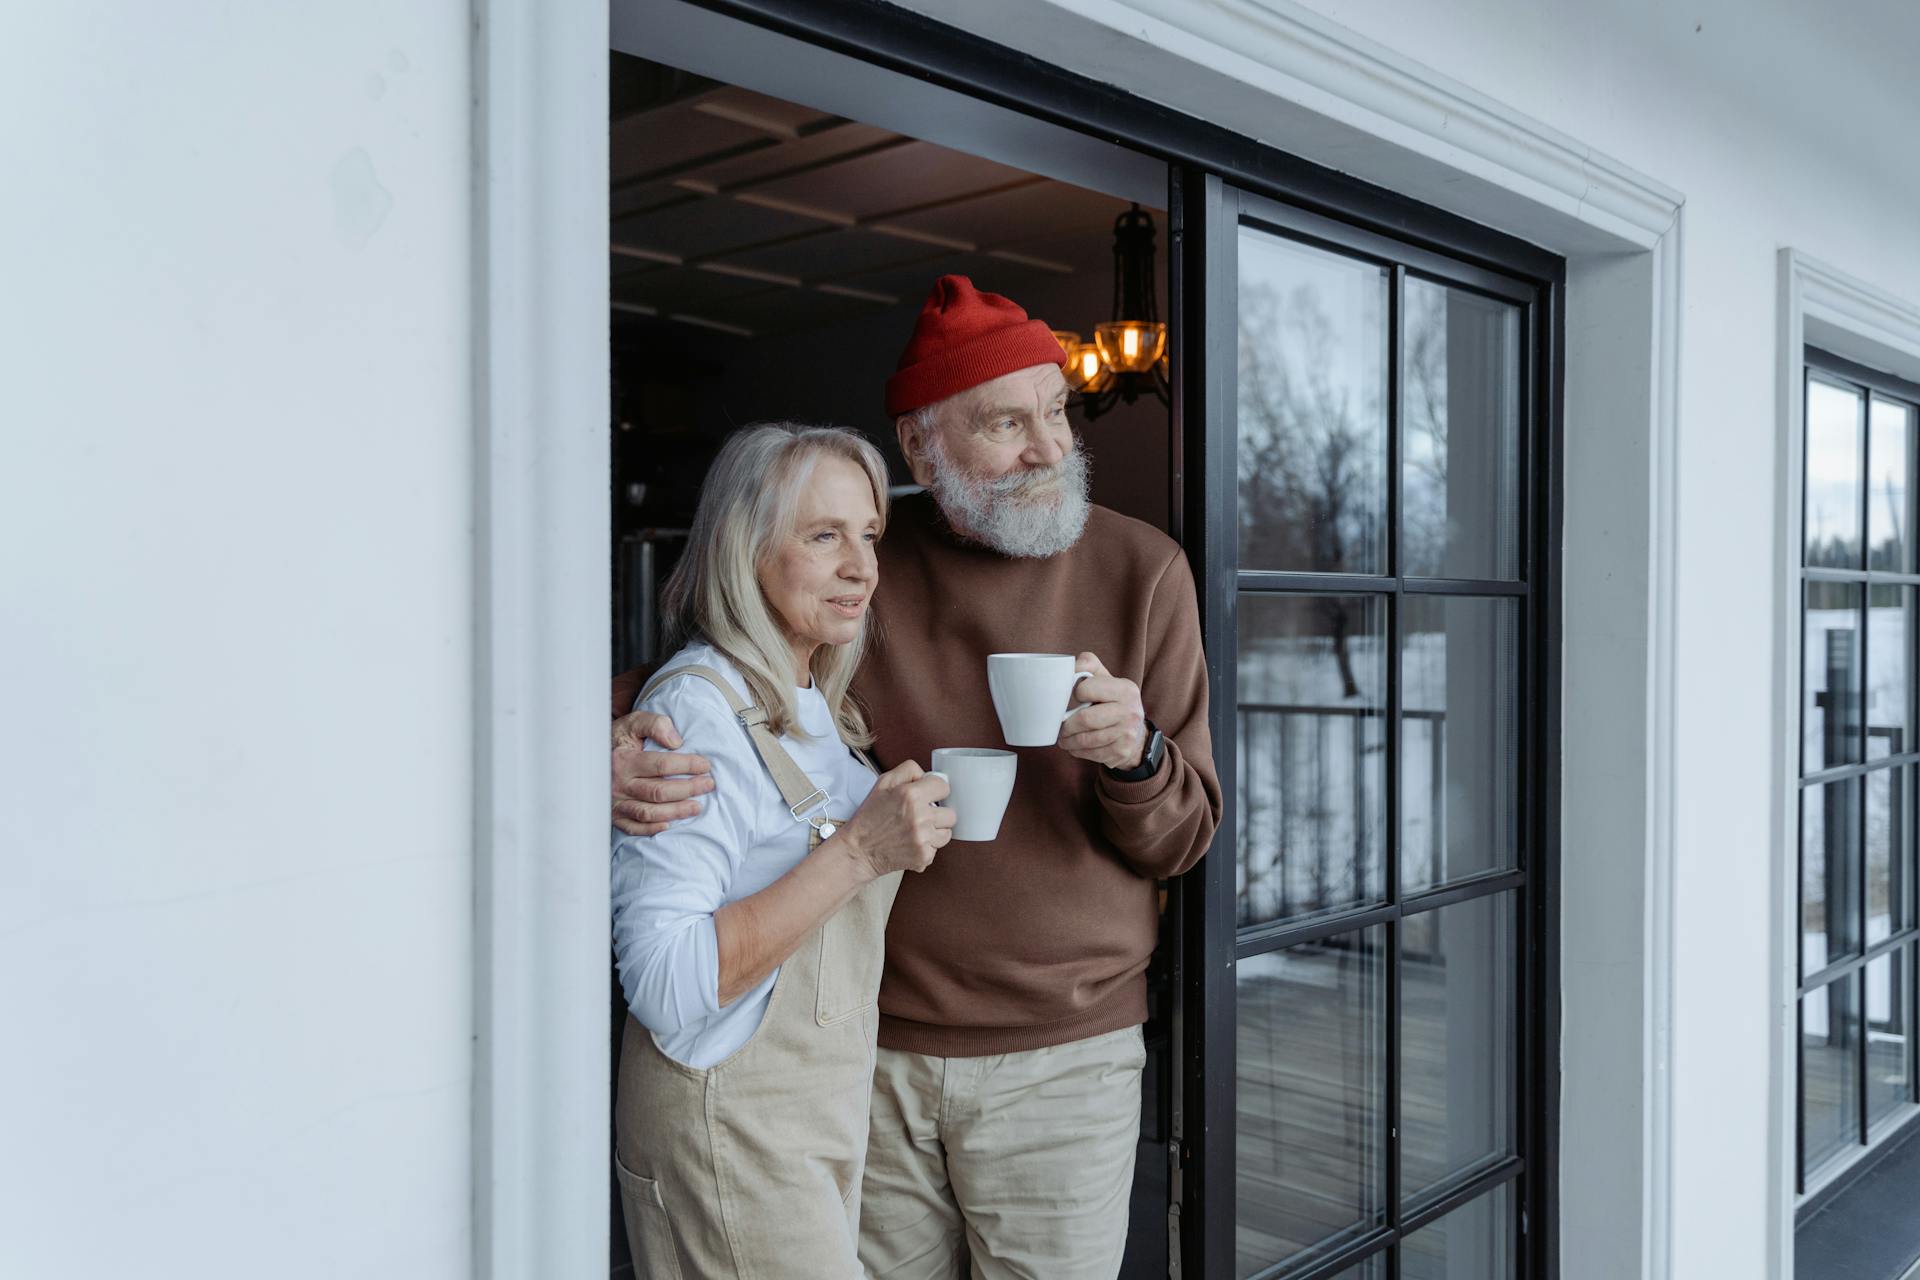 An older couple standing at a doorstep, each holding a cup | Source: Pexels